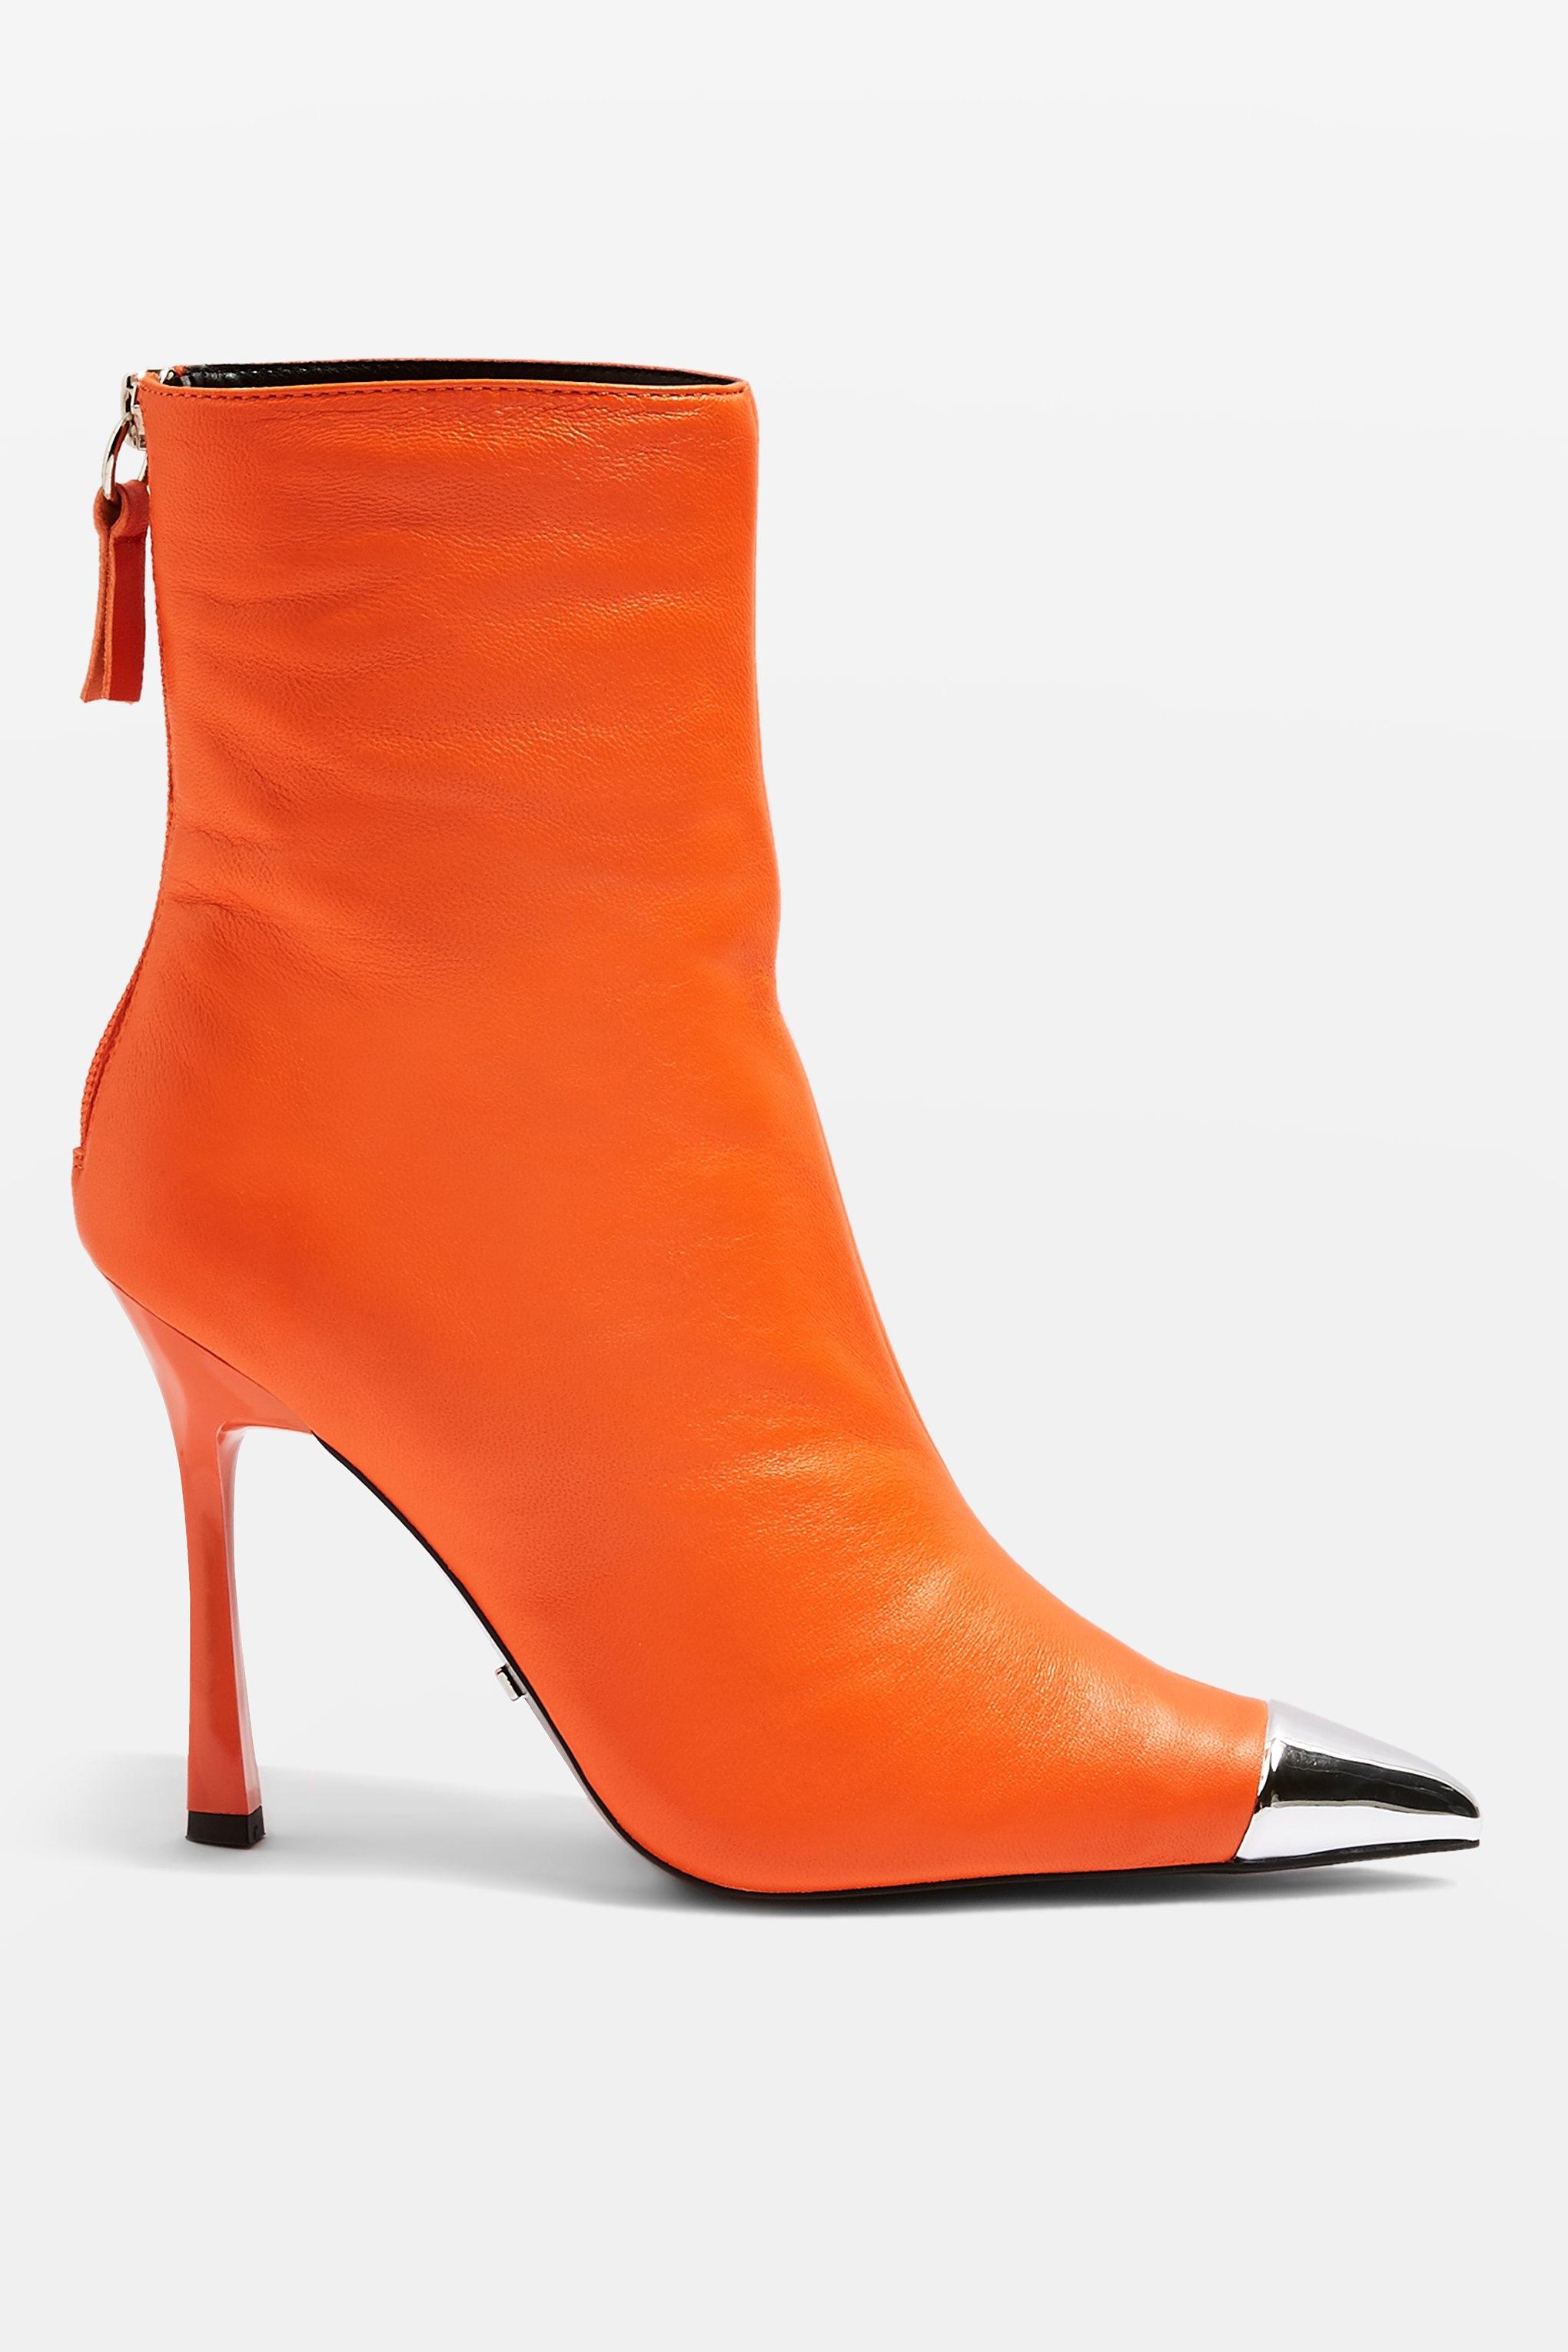 TOPSHOP Hypnotise Leather Ankle Boots in Orange - Lyst